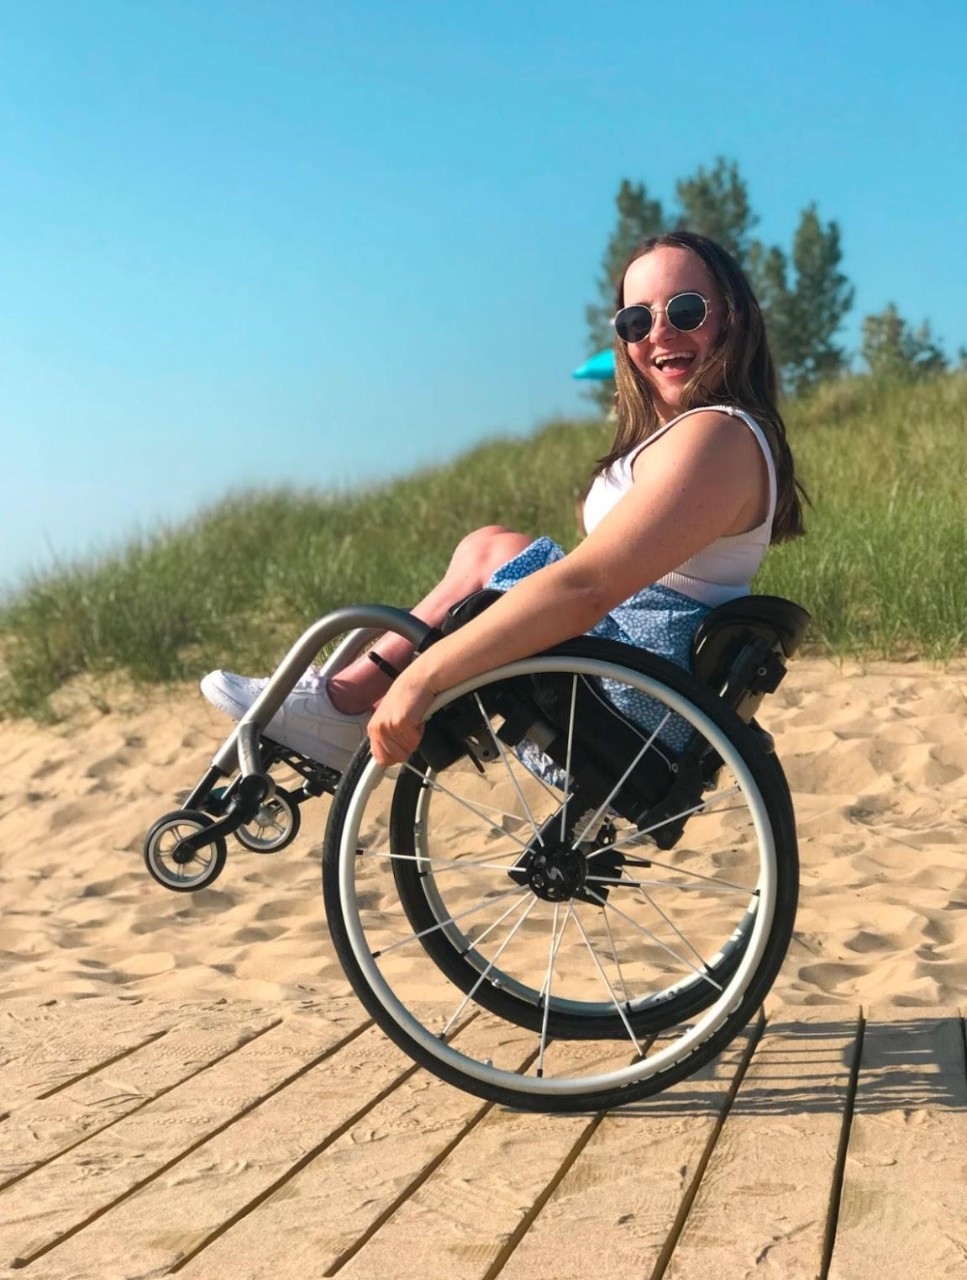 a photo of a young white woman with a physical disability on a sunny beach that goes with the feature story whose title is also on the cover, “Rosie Roaming: Have Wheels, Will Travel”. She has long brown hair, a white tank top, blue flowered shorts, white sneakers and sunglasses. She is tilting back doing a wheelie in her wheelchair and smiling a big smile. She is on a wooden boardwalk on a beach with sand and beach grass behind her. It is a beautiful sunny day with blue skies. 